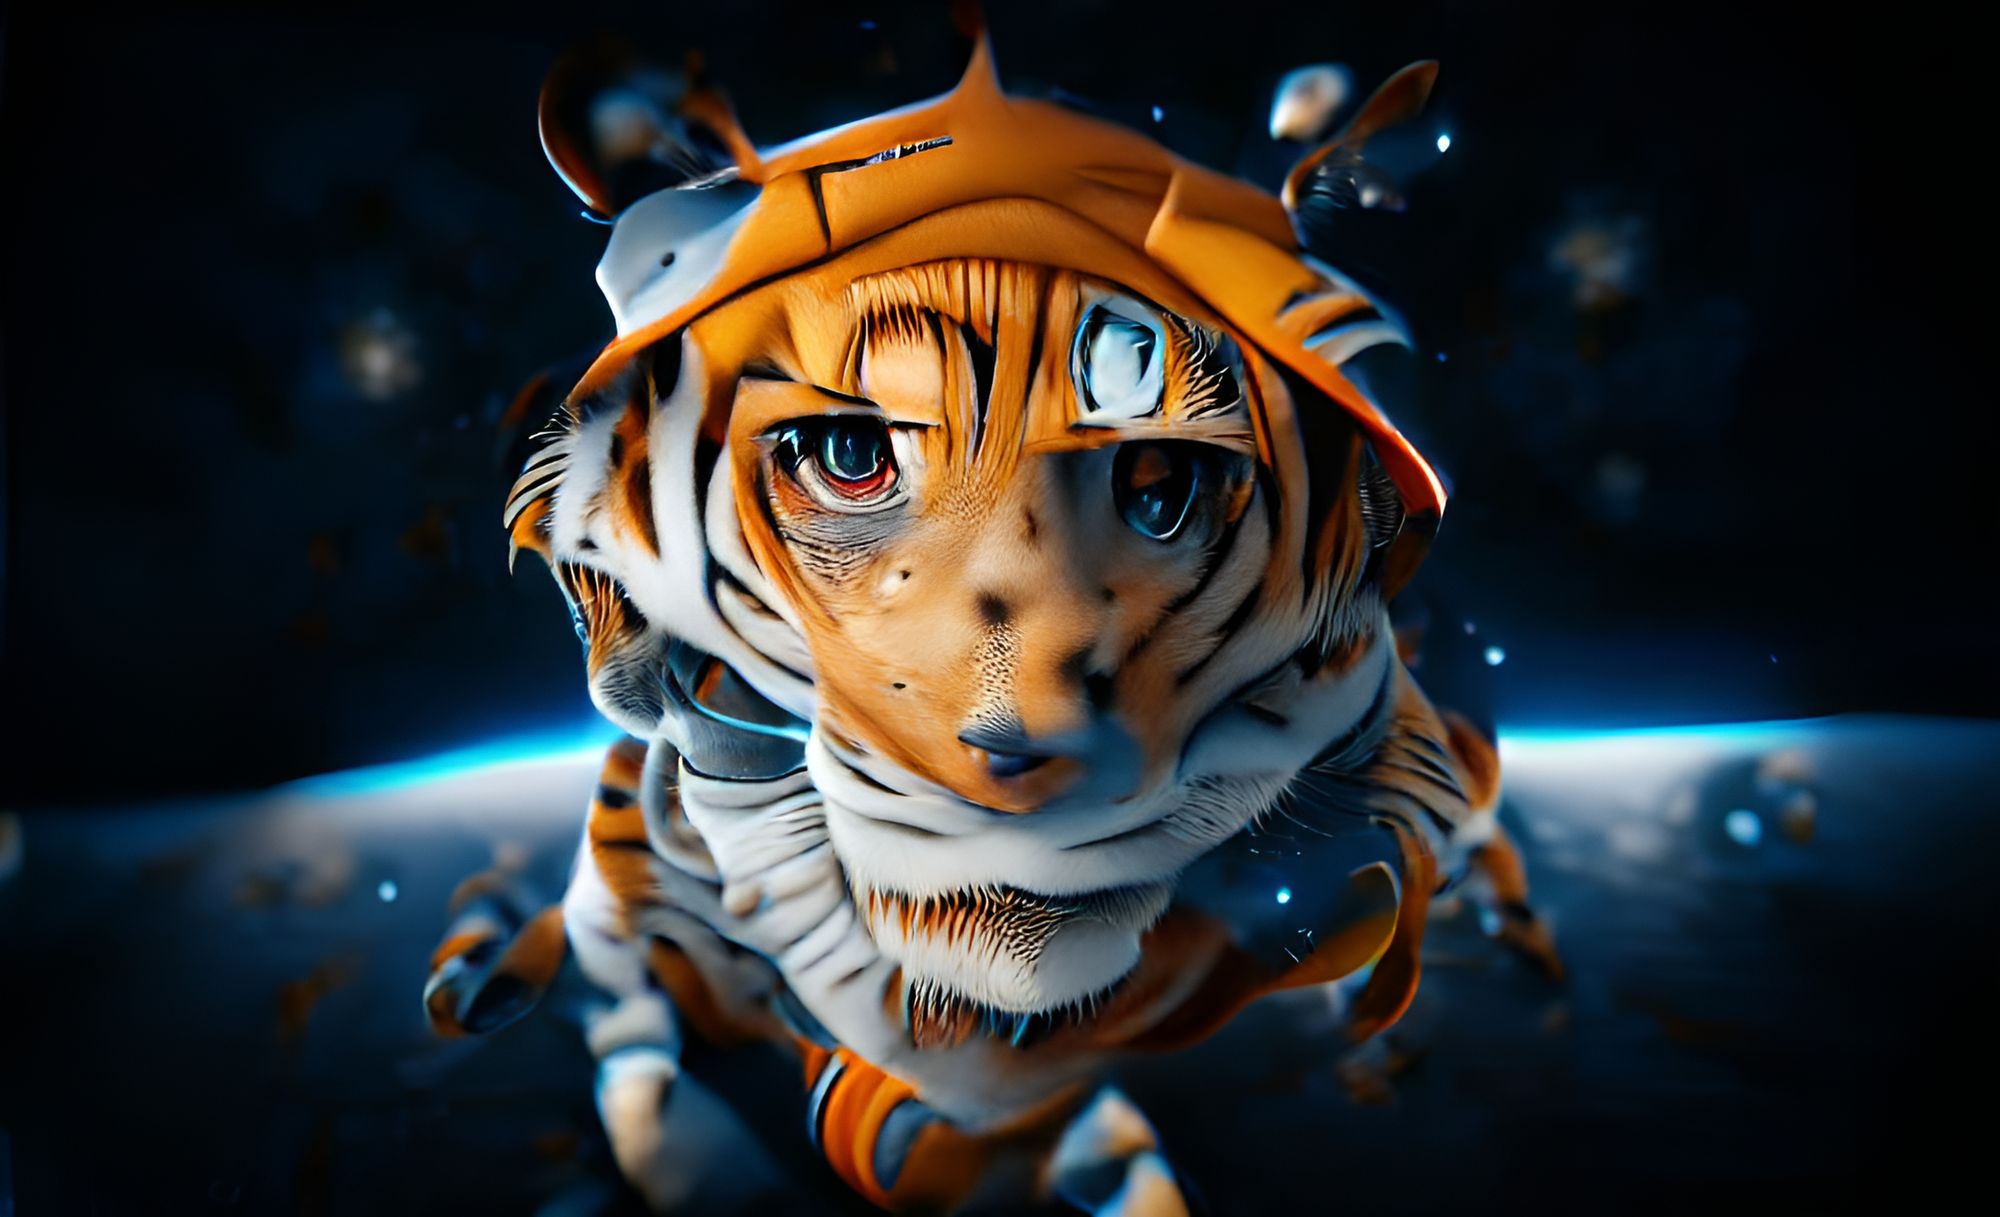 AI Art Generator: (kawaii falcon anime tiger), (falcon), (sitting), looking  up, cute, cartoon style, illustration, full body portrait, detailed, center  of frame, 2d